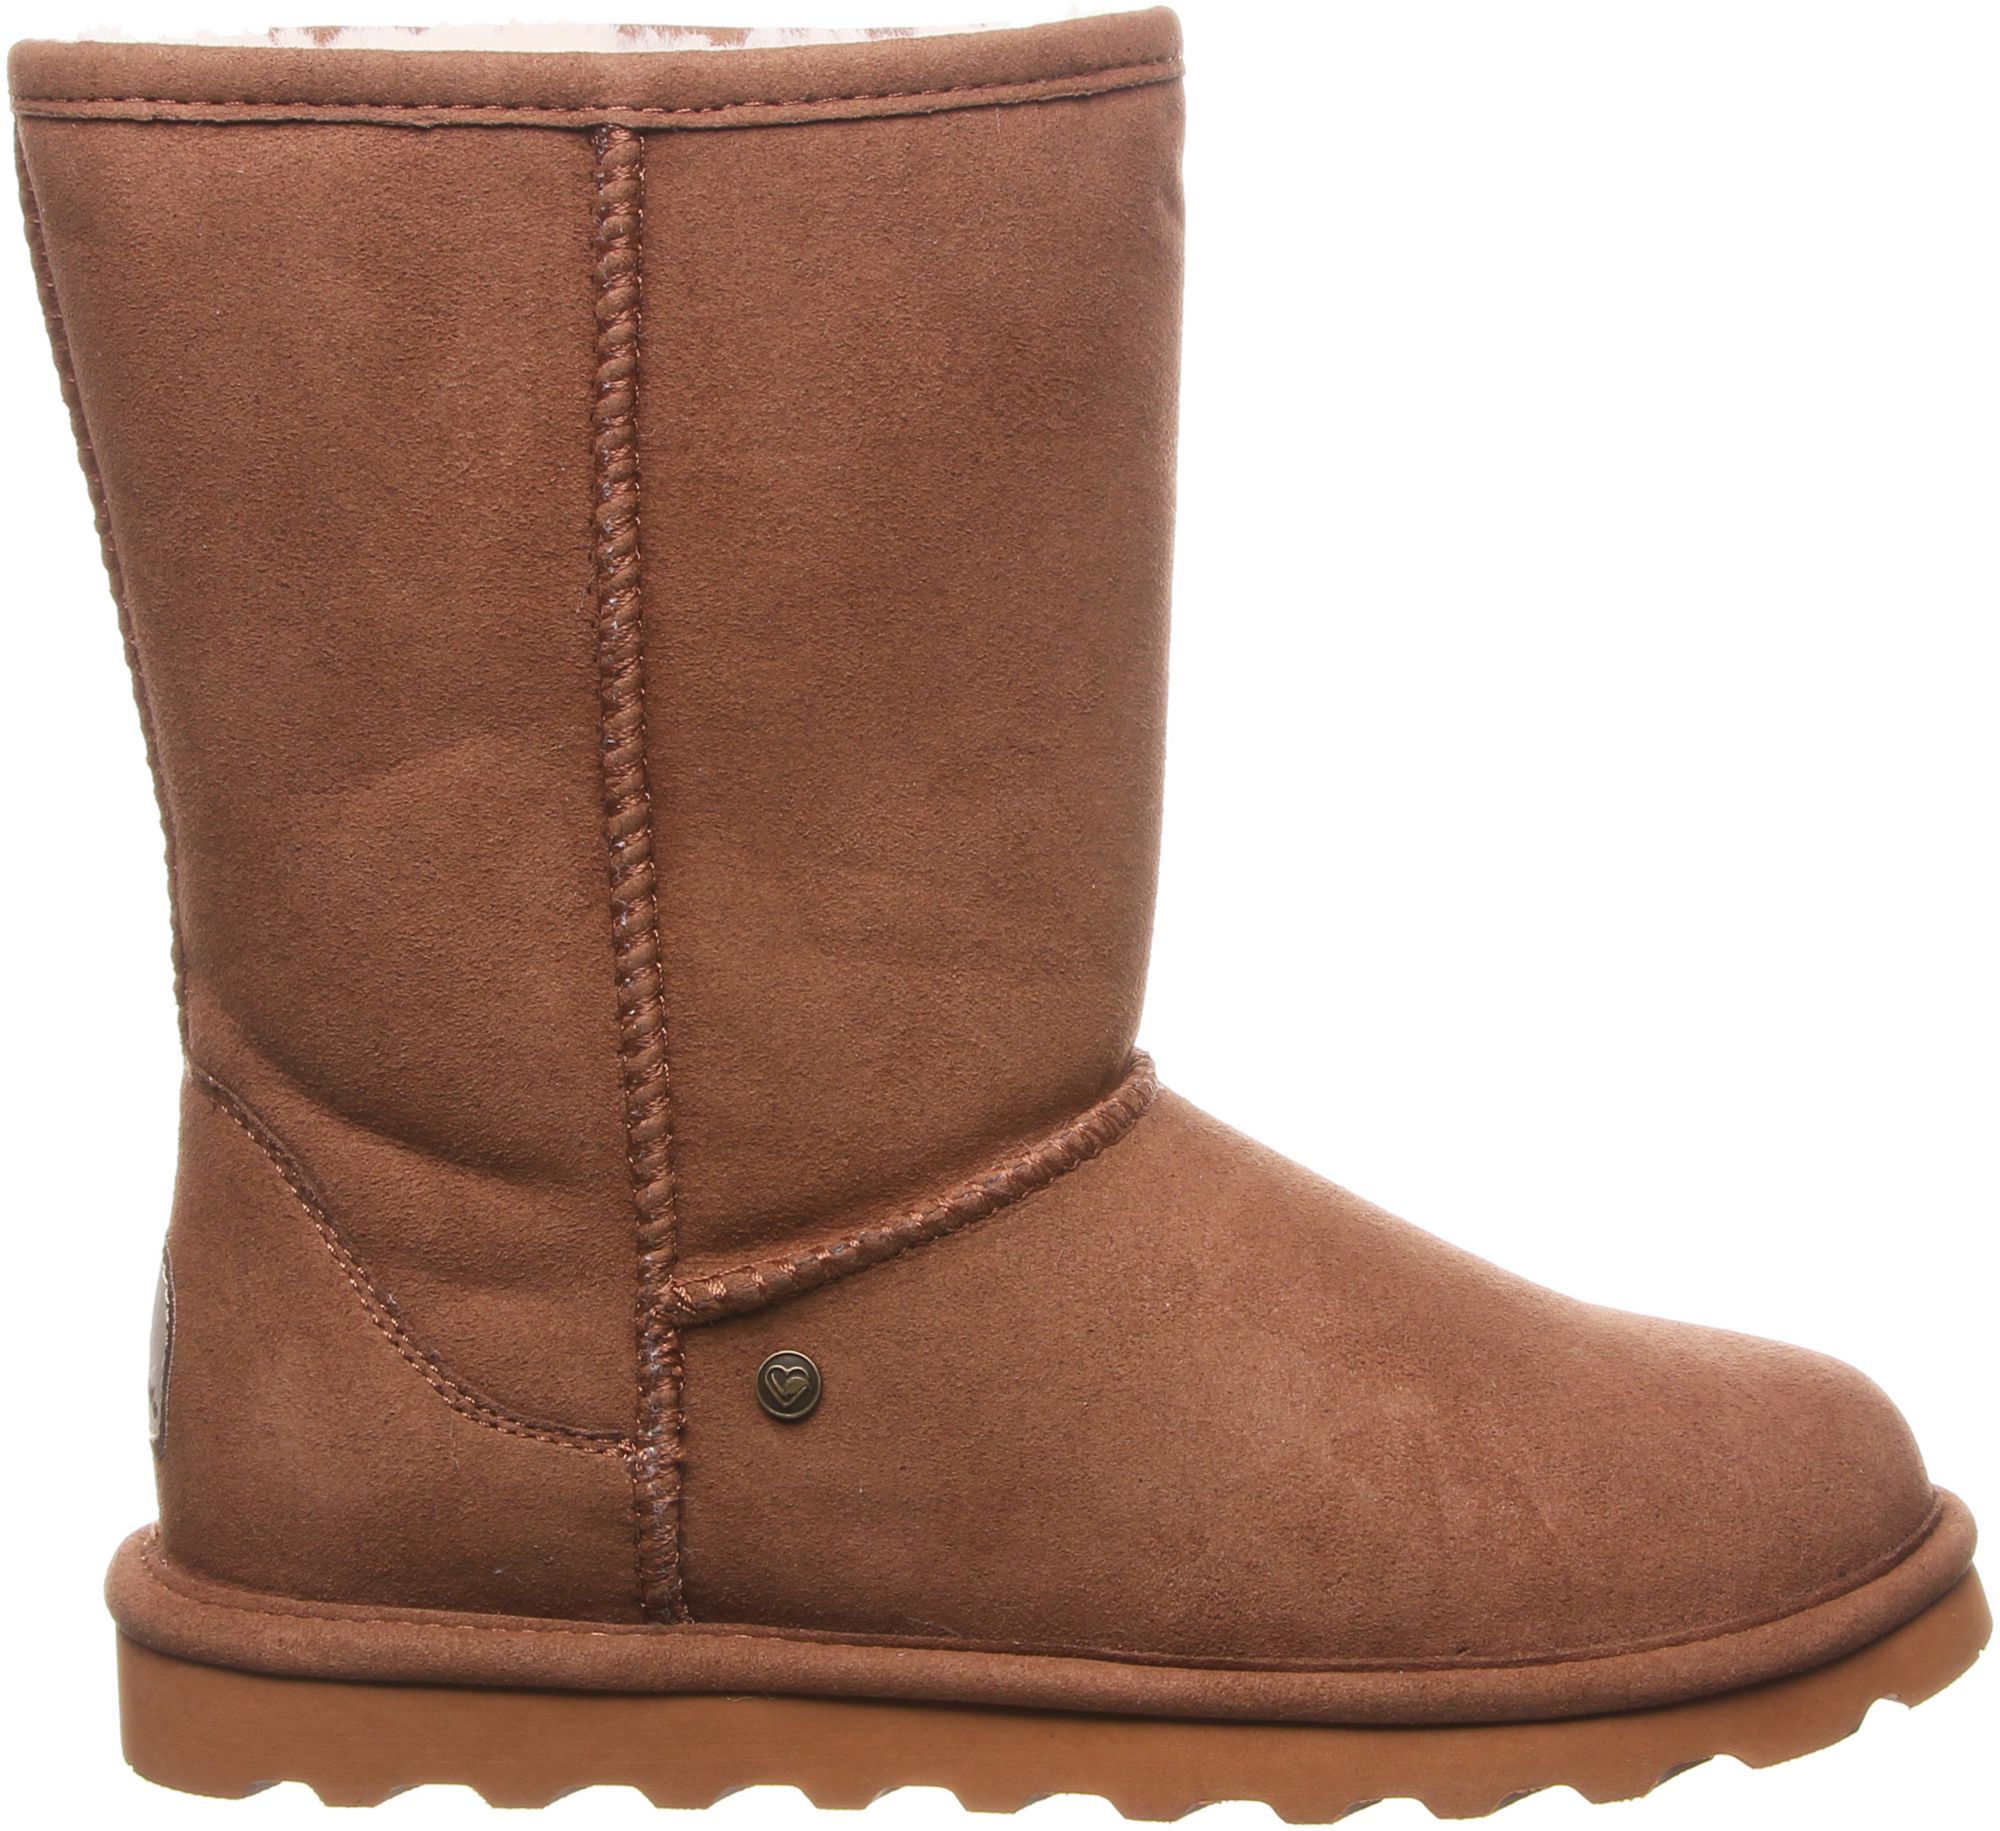 leather bearpaw boots